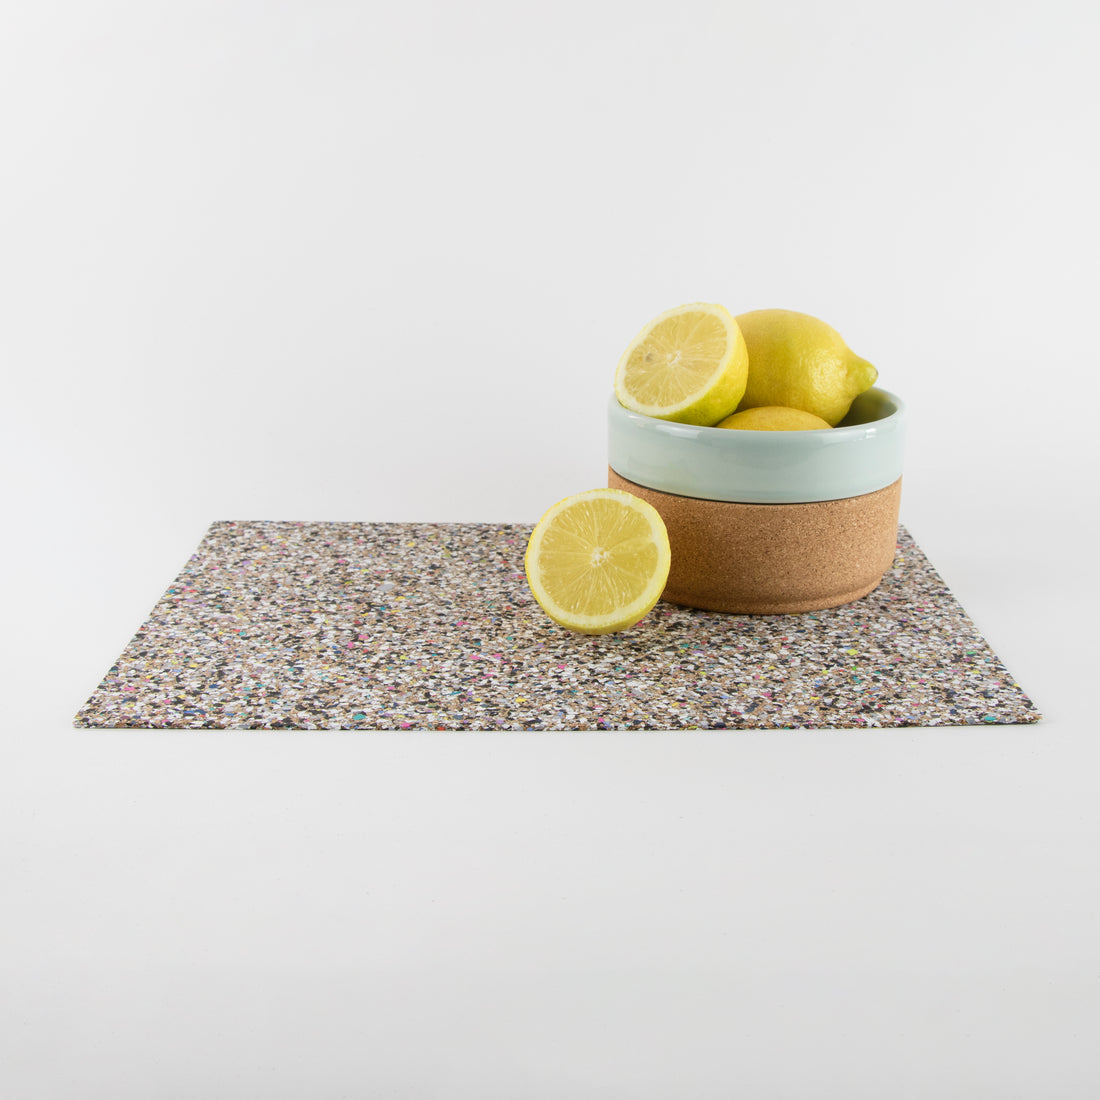 Sustainable Beach Clean Rectangle PlacematsRecycled Beach Clean Rectangle Placemats